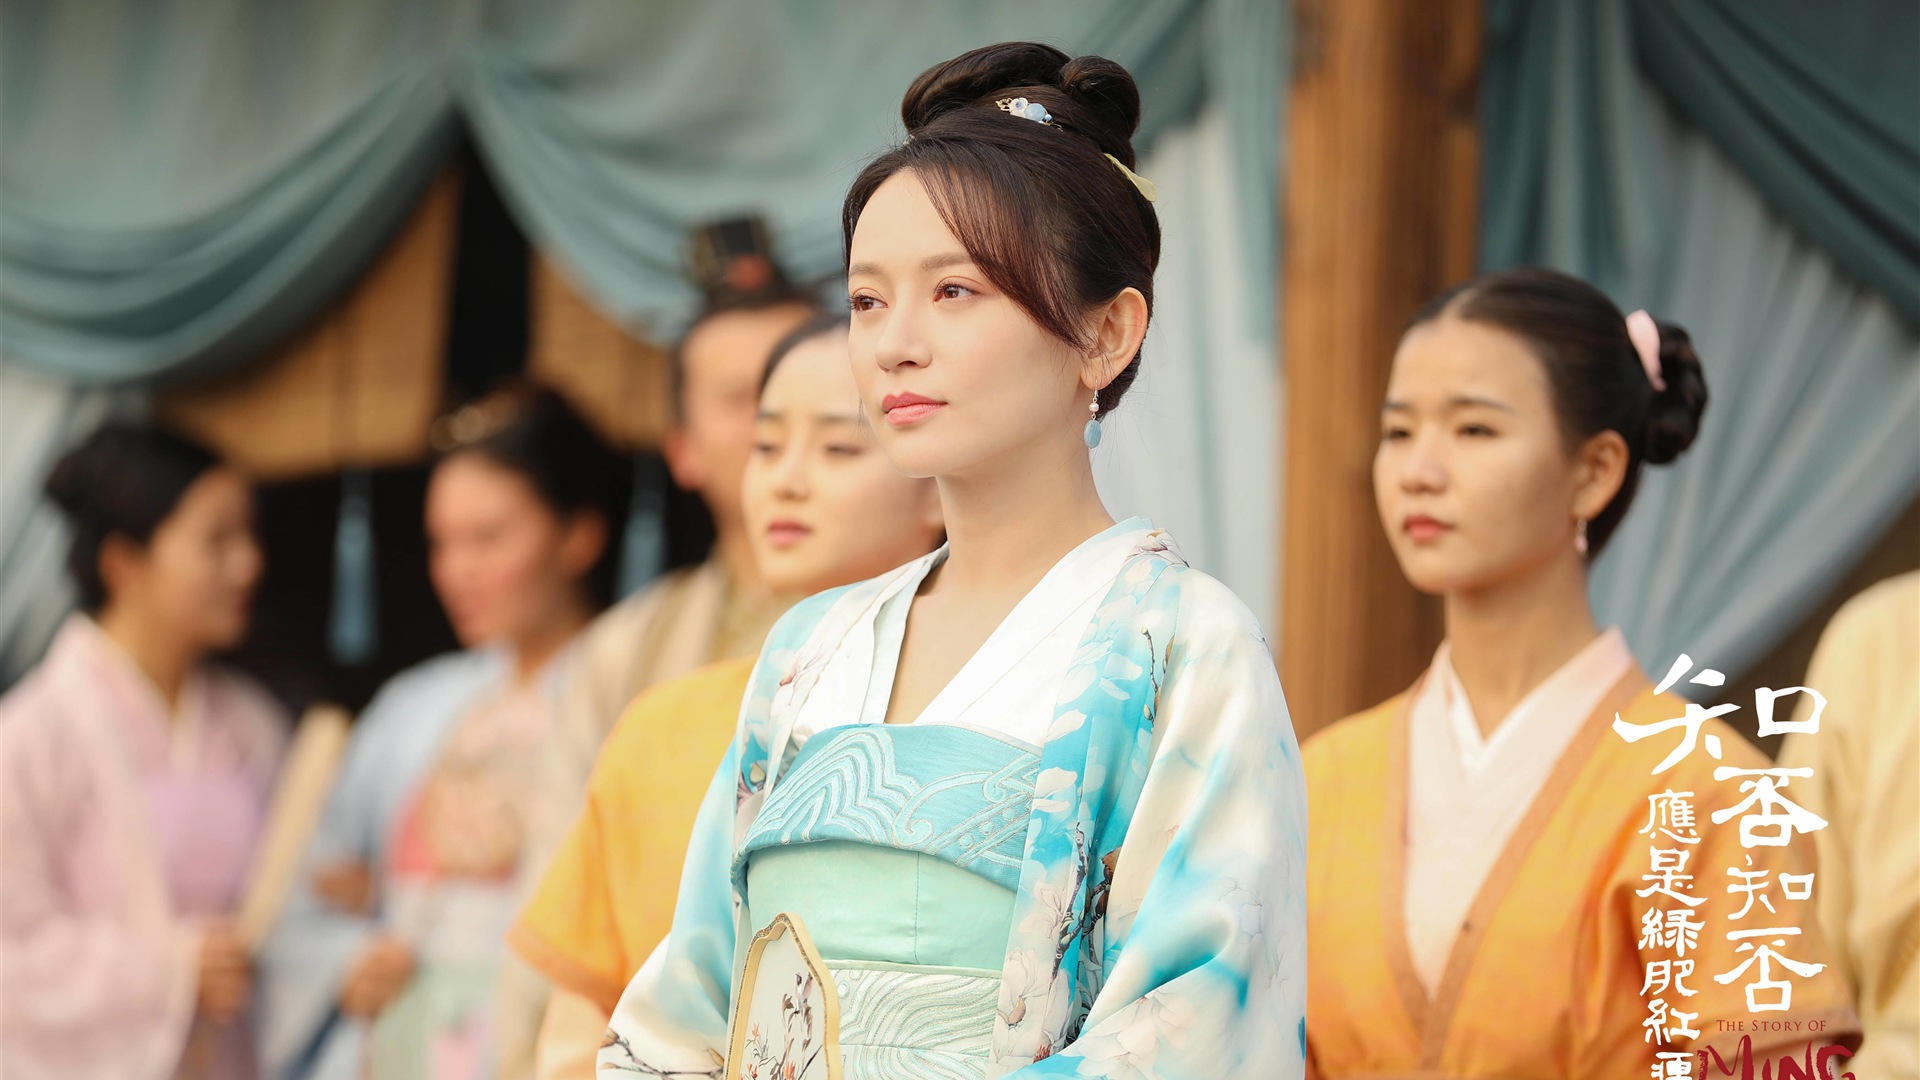 The Story Of MingLan, TV series HD wallpapers #22 - 1920x1080